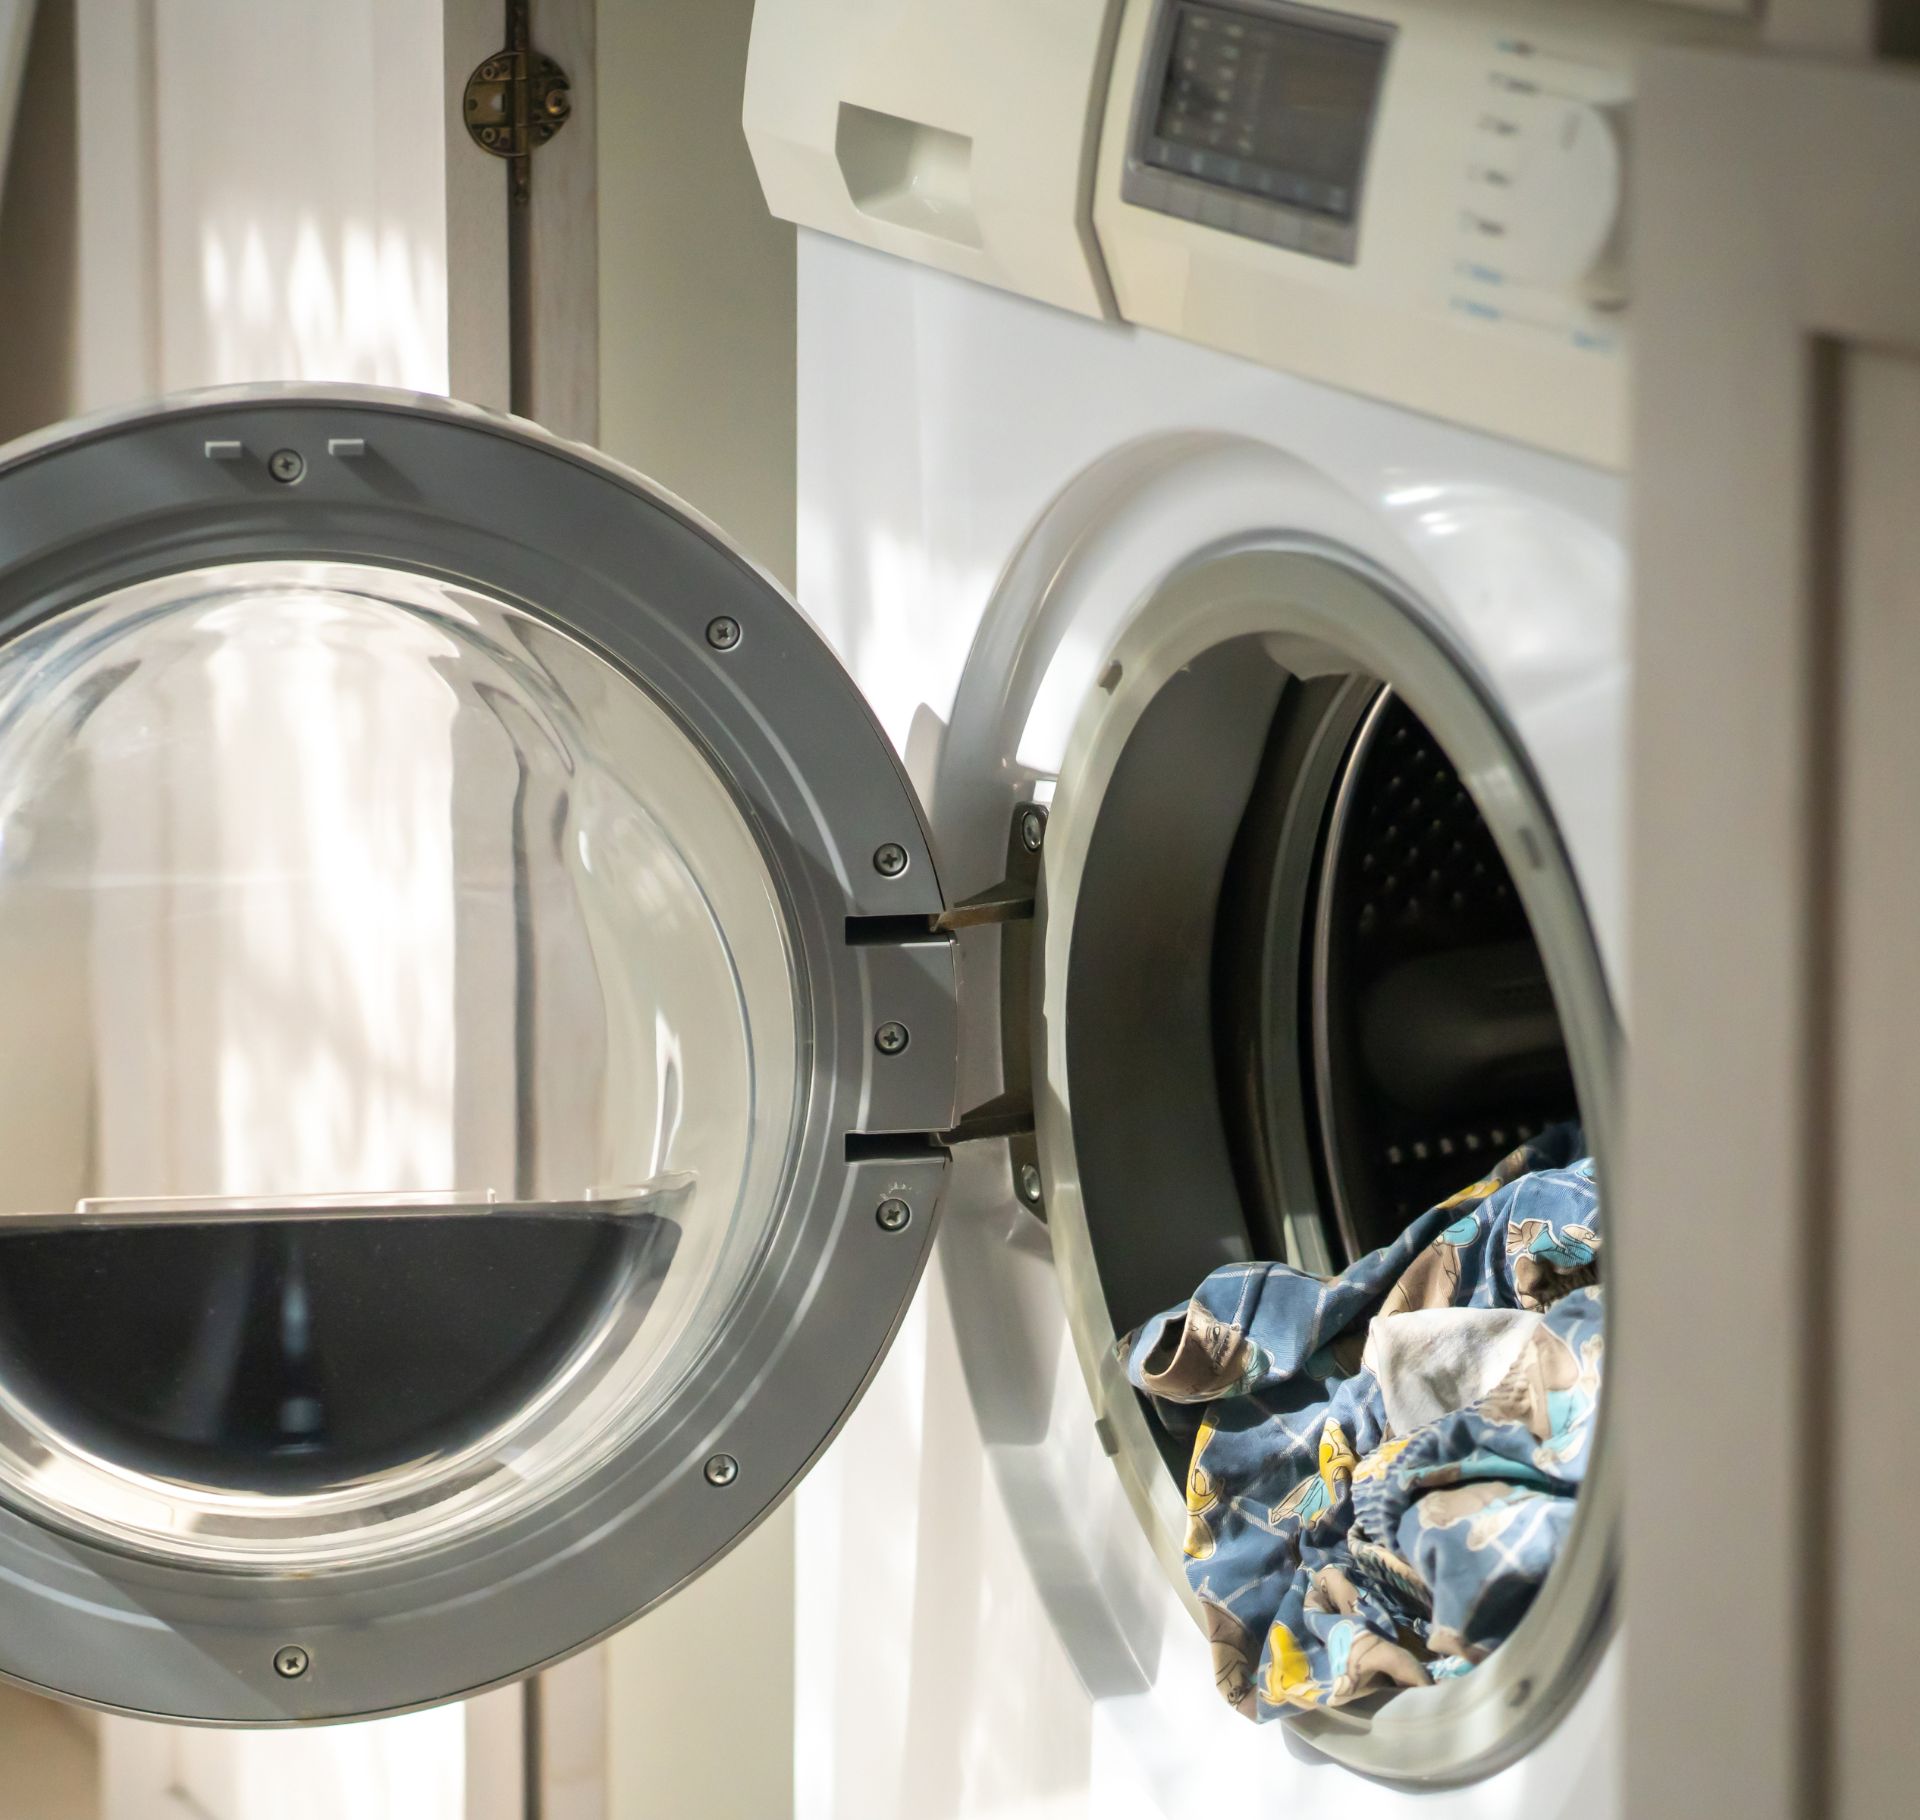 Solving Door and Lid Lock Issues in Smart Washers 